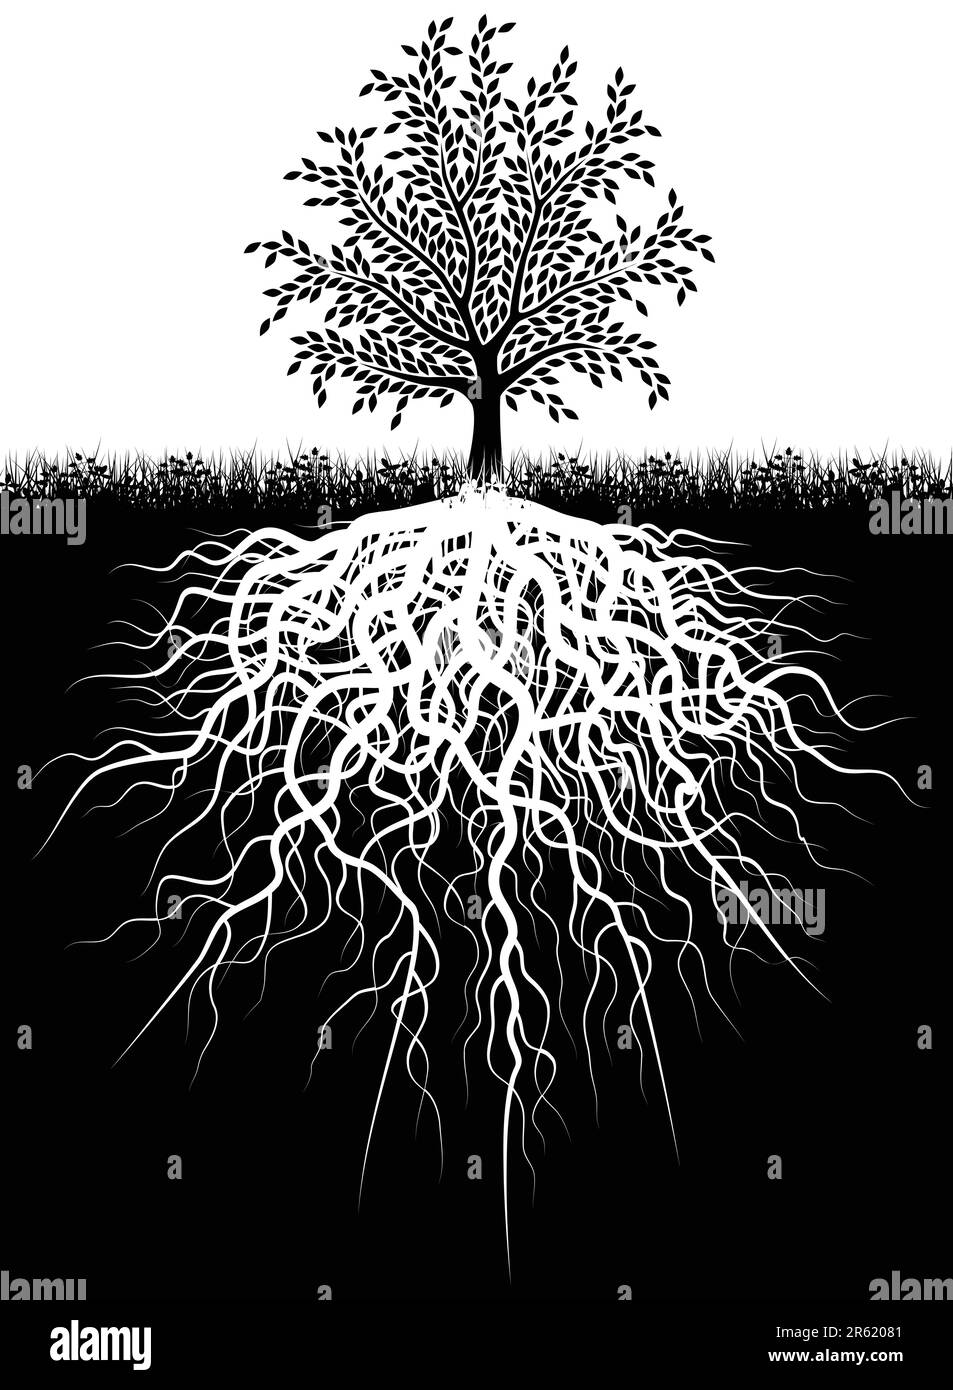 Editable vector illustration of a tree and its roots Stock Vector